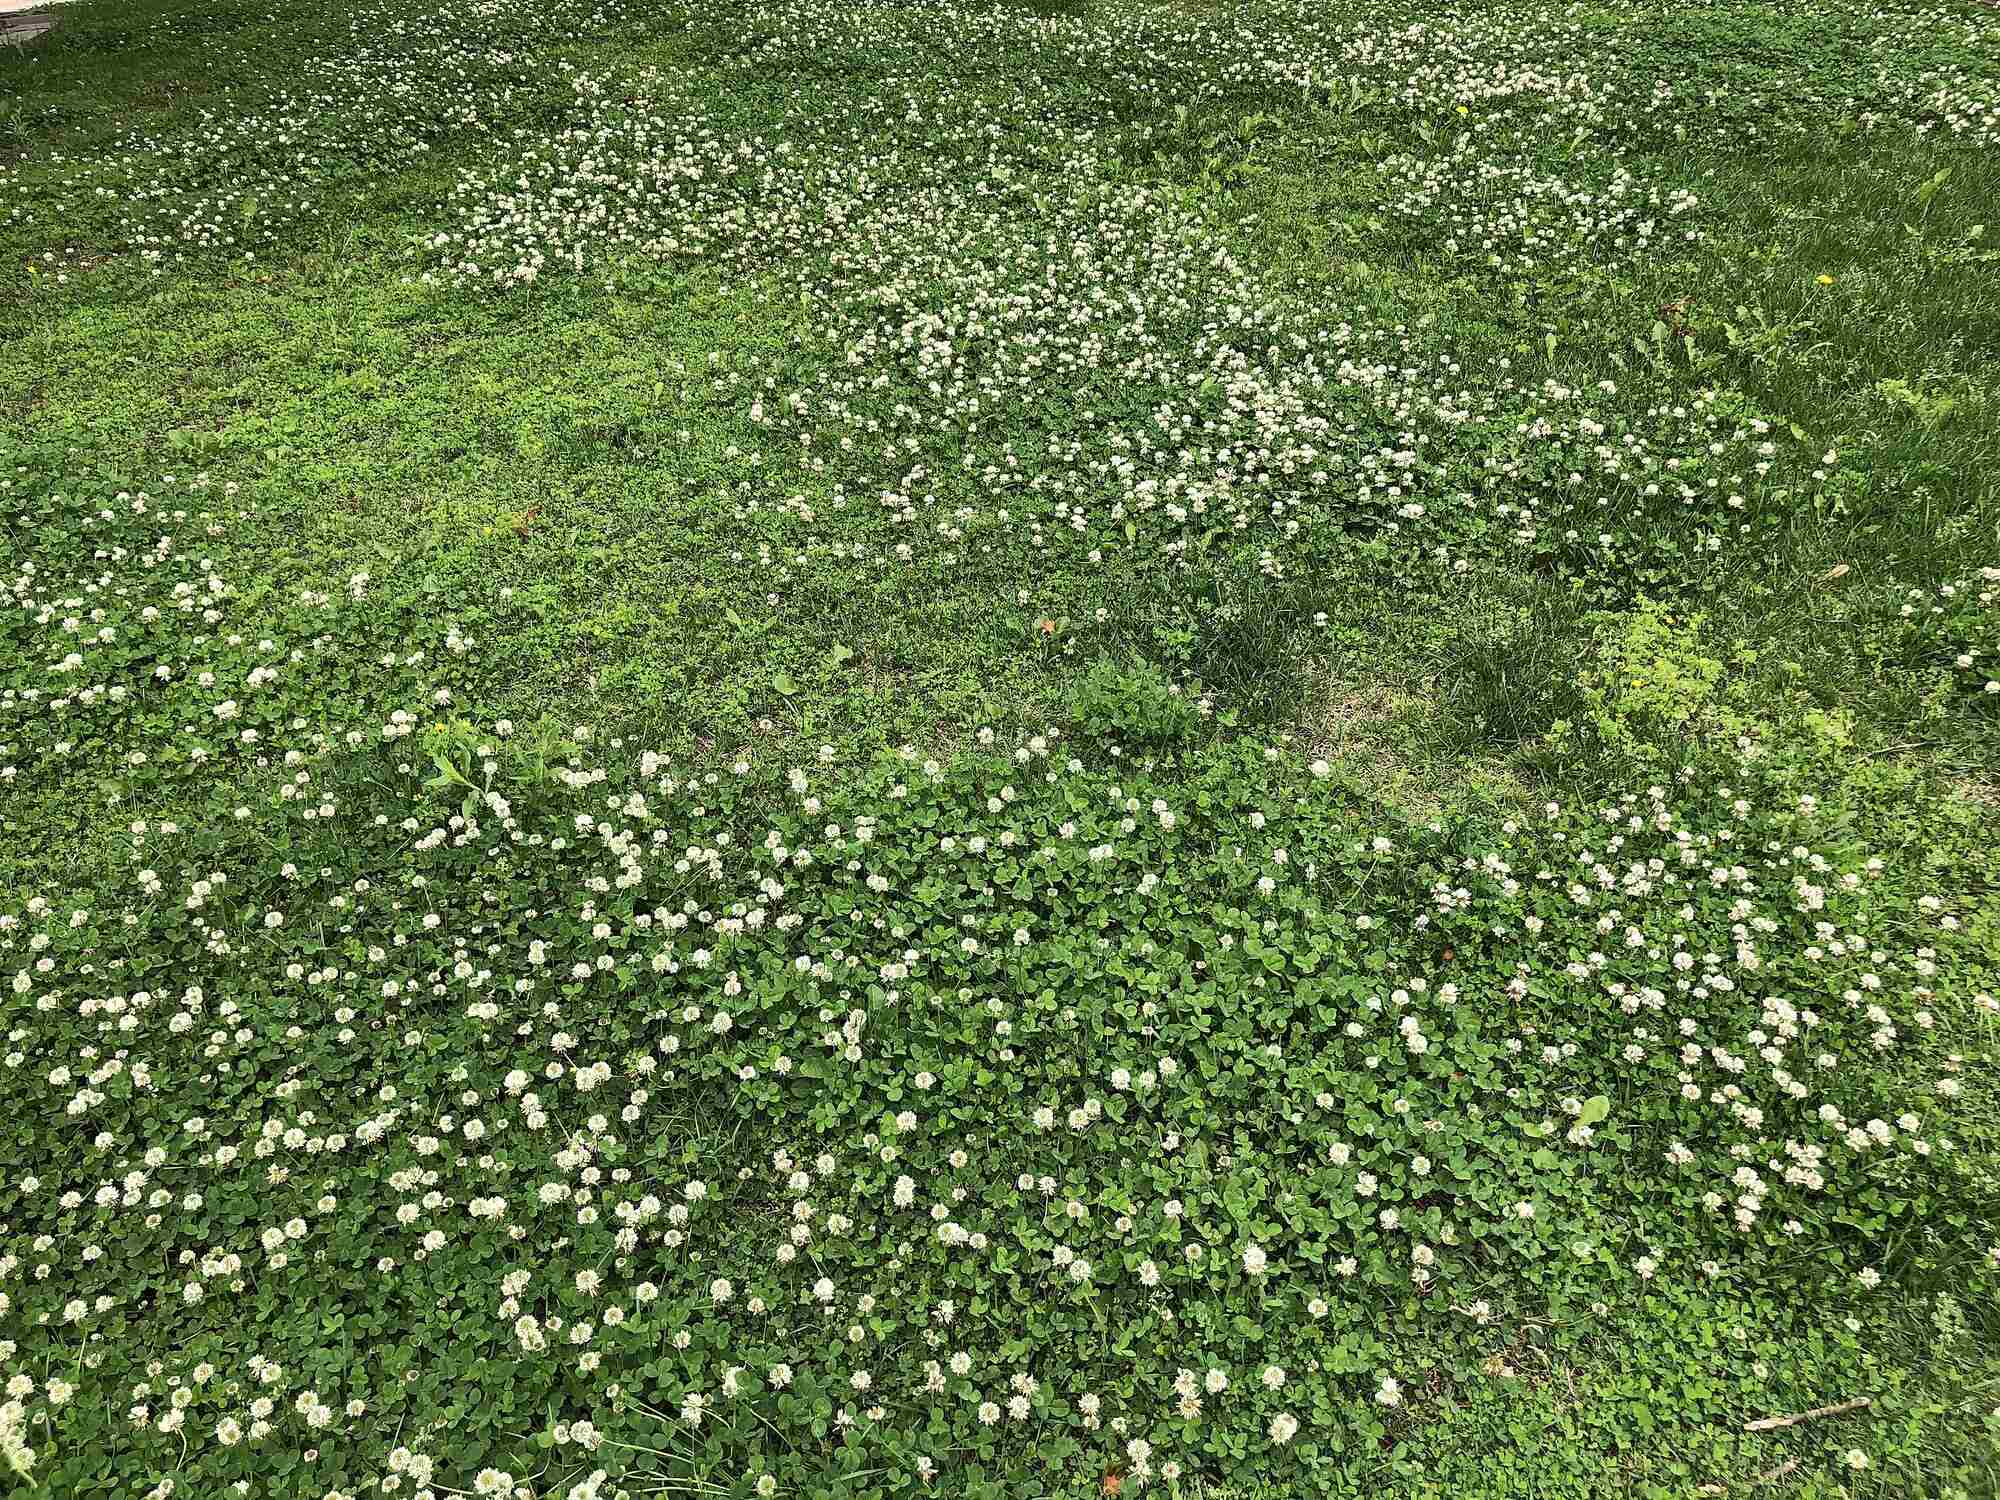 Photograph of a lawn with abundant white clover. The photo shows a lawn with many small white flowers growing in it.